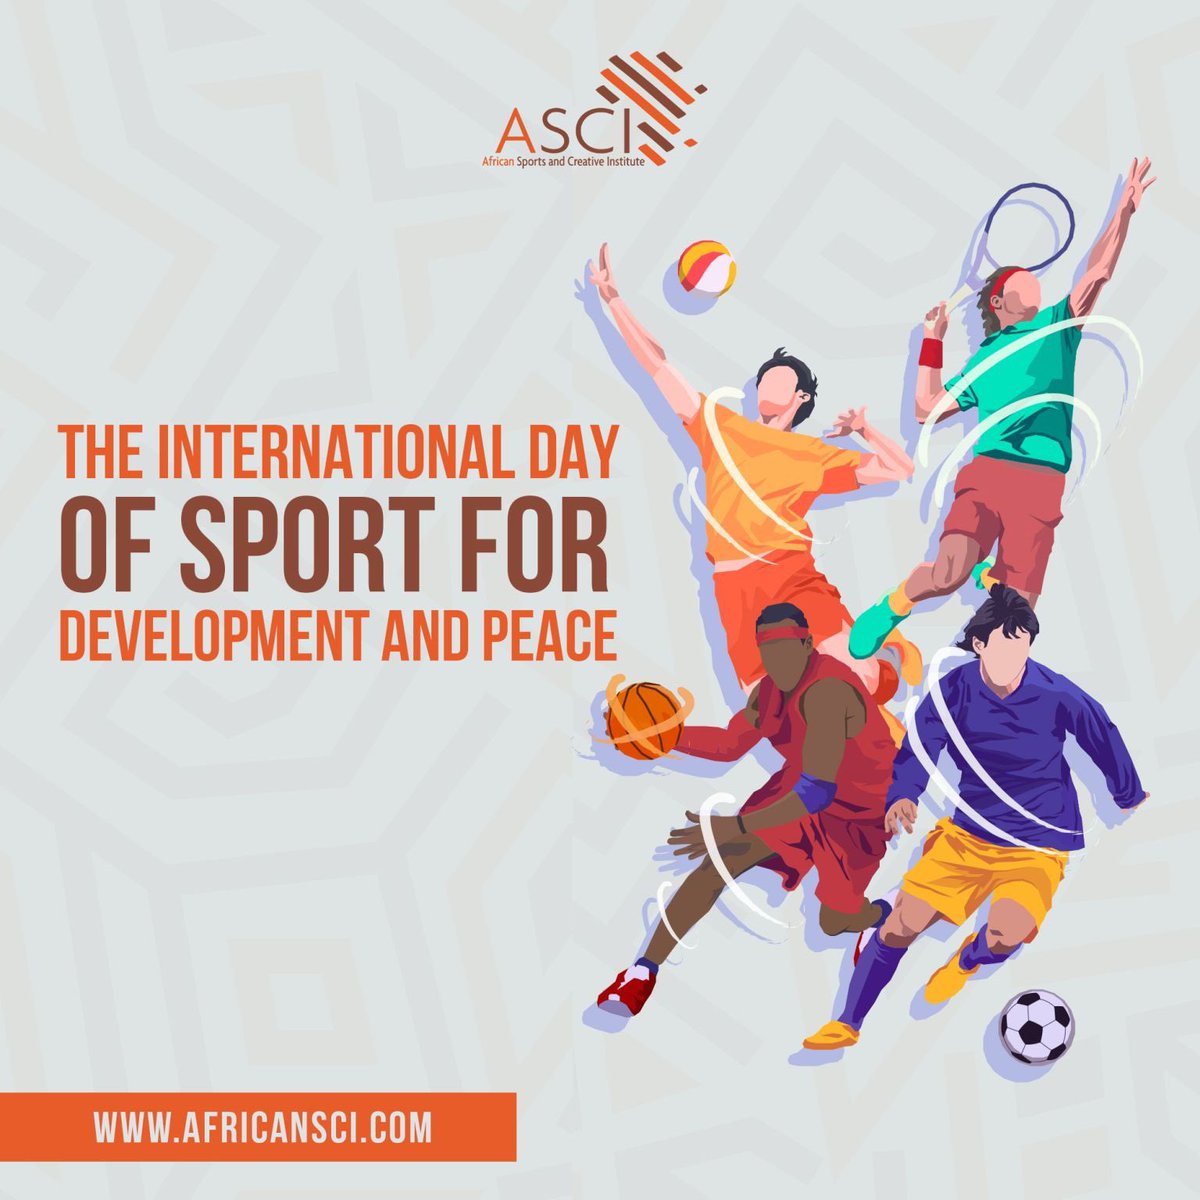 Celebrating International Day of Sport for Development and Peace!

#roadto5 #asci #africawewant
#africa #AfricanFootball #basketball #africansports